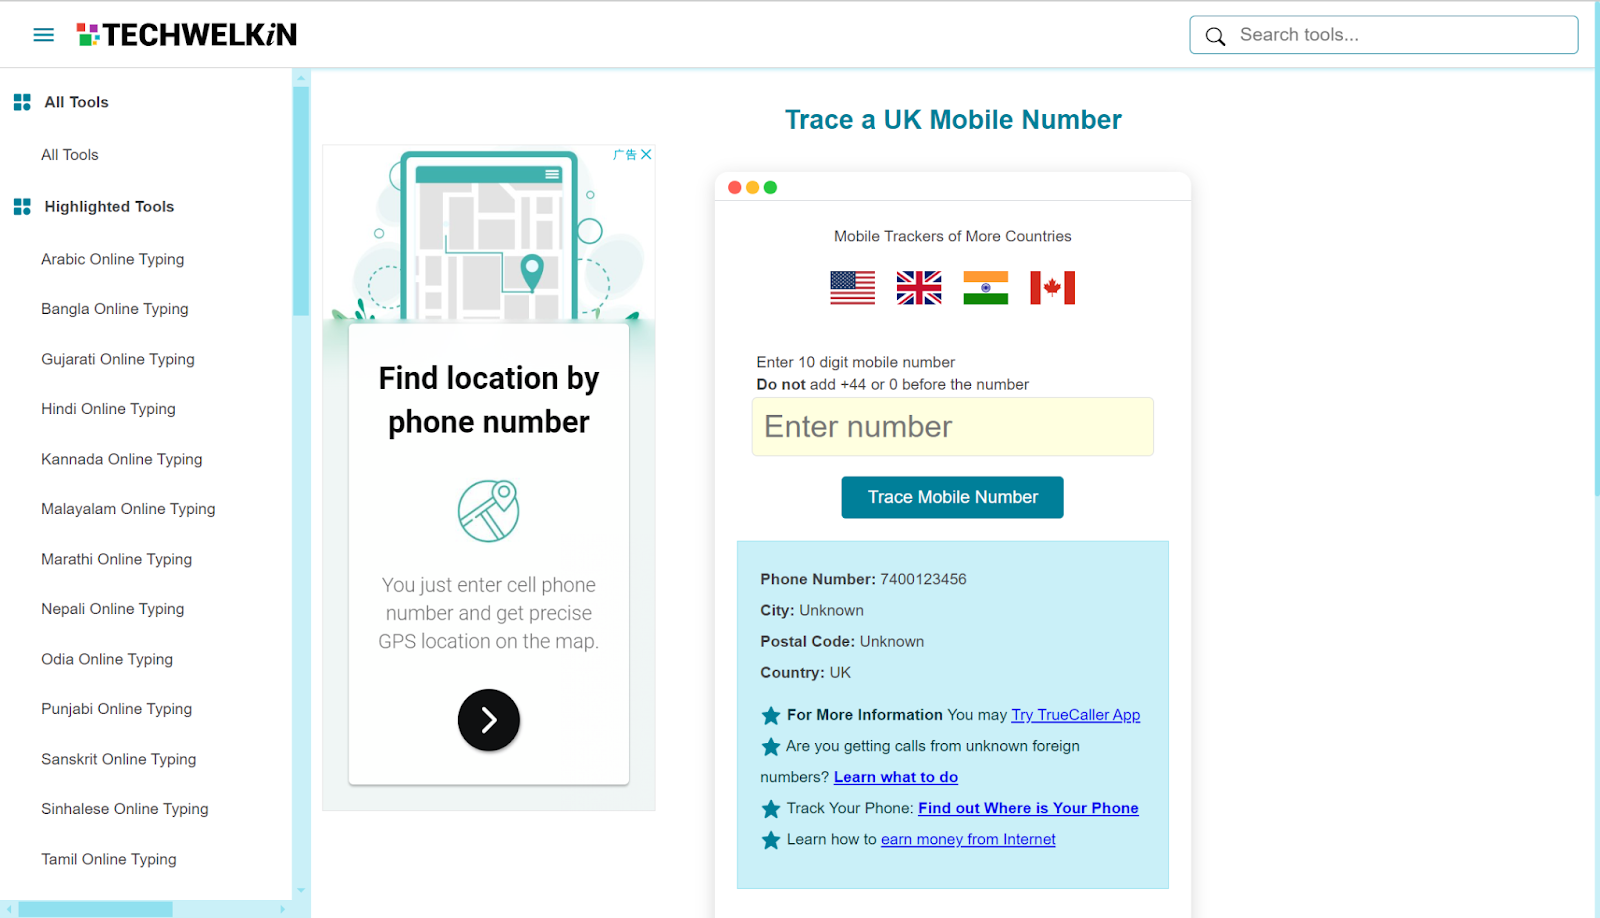 trace a uk mobile number on Techwelkin